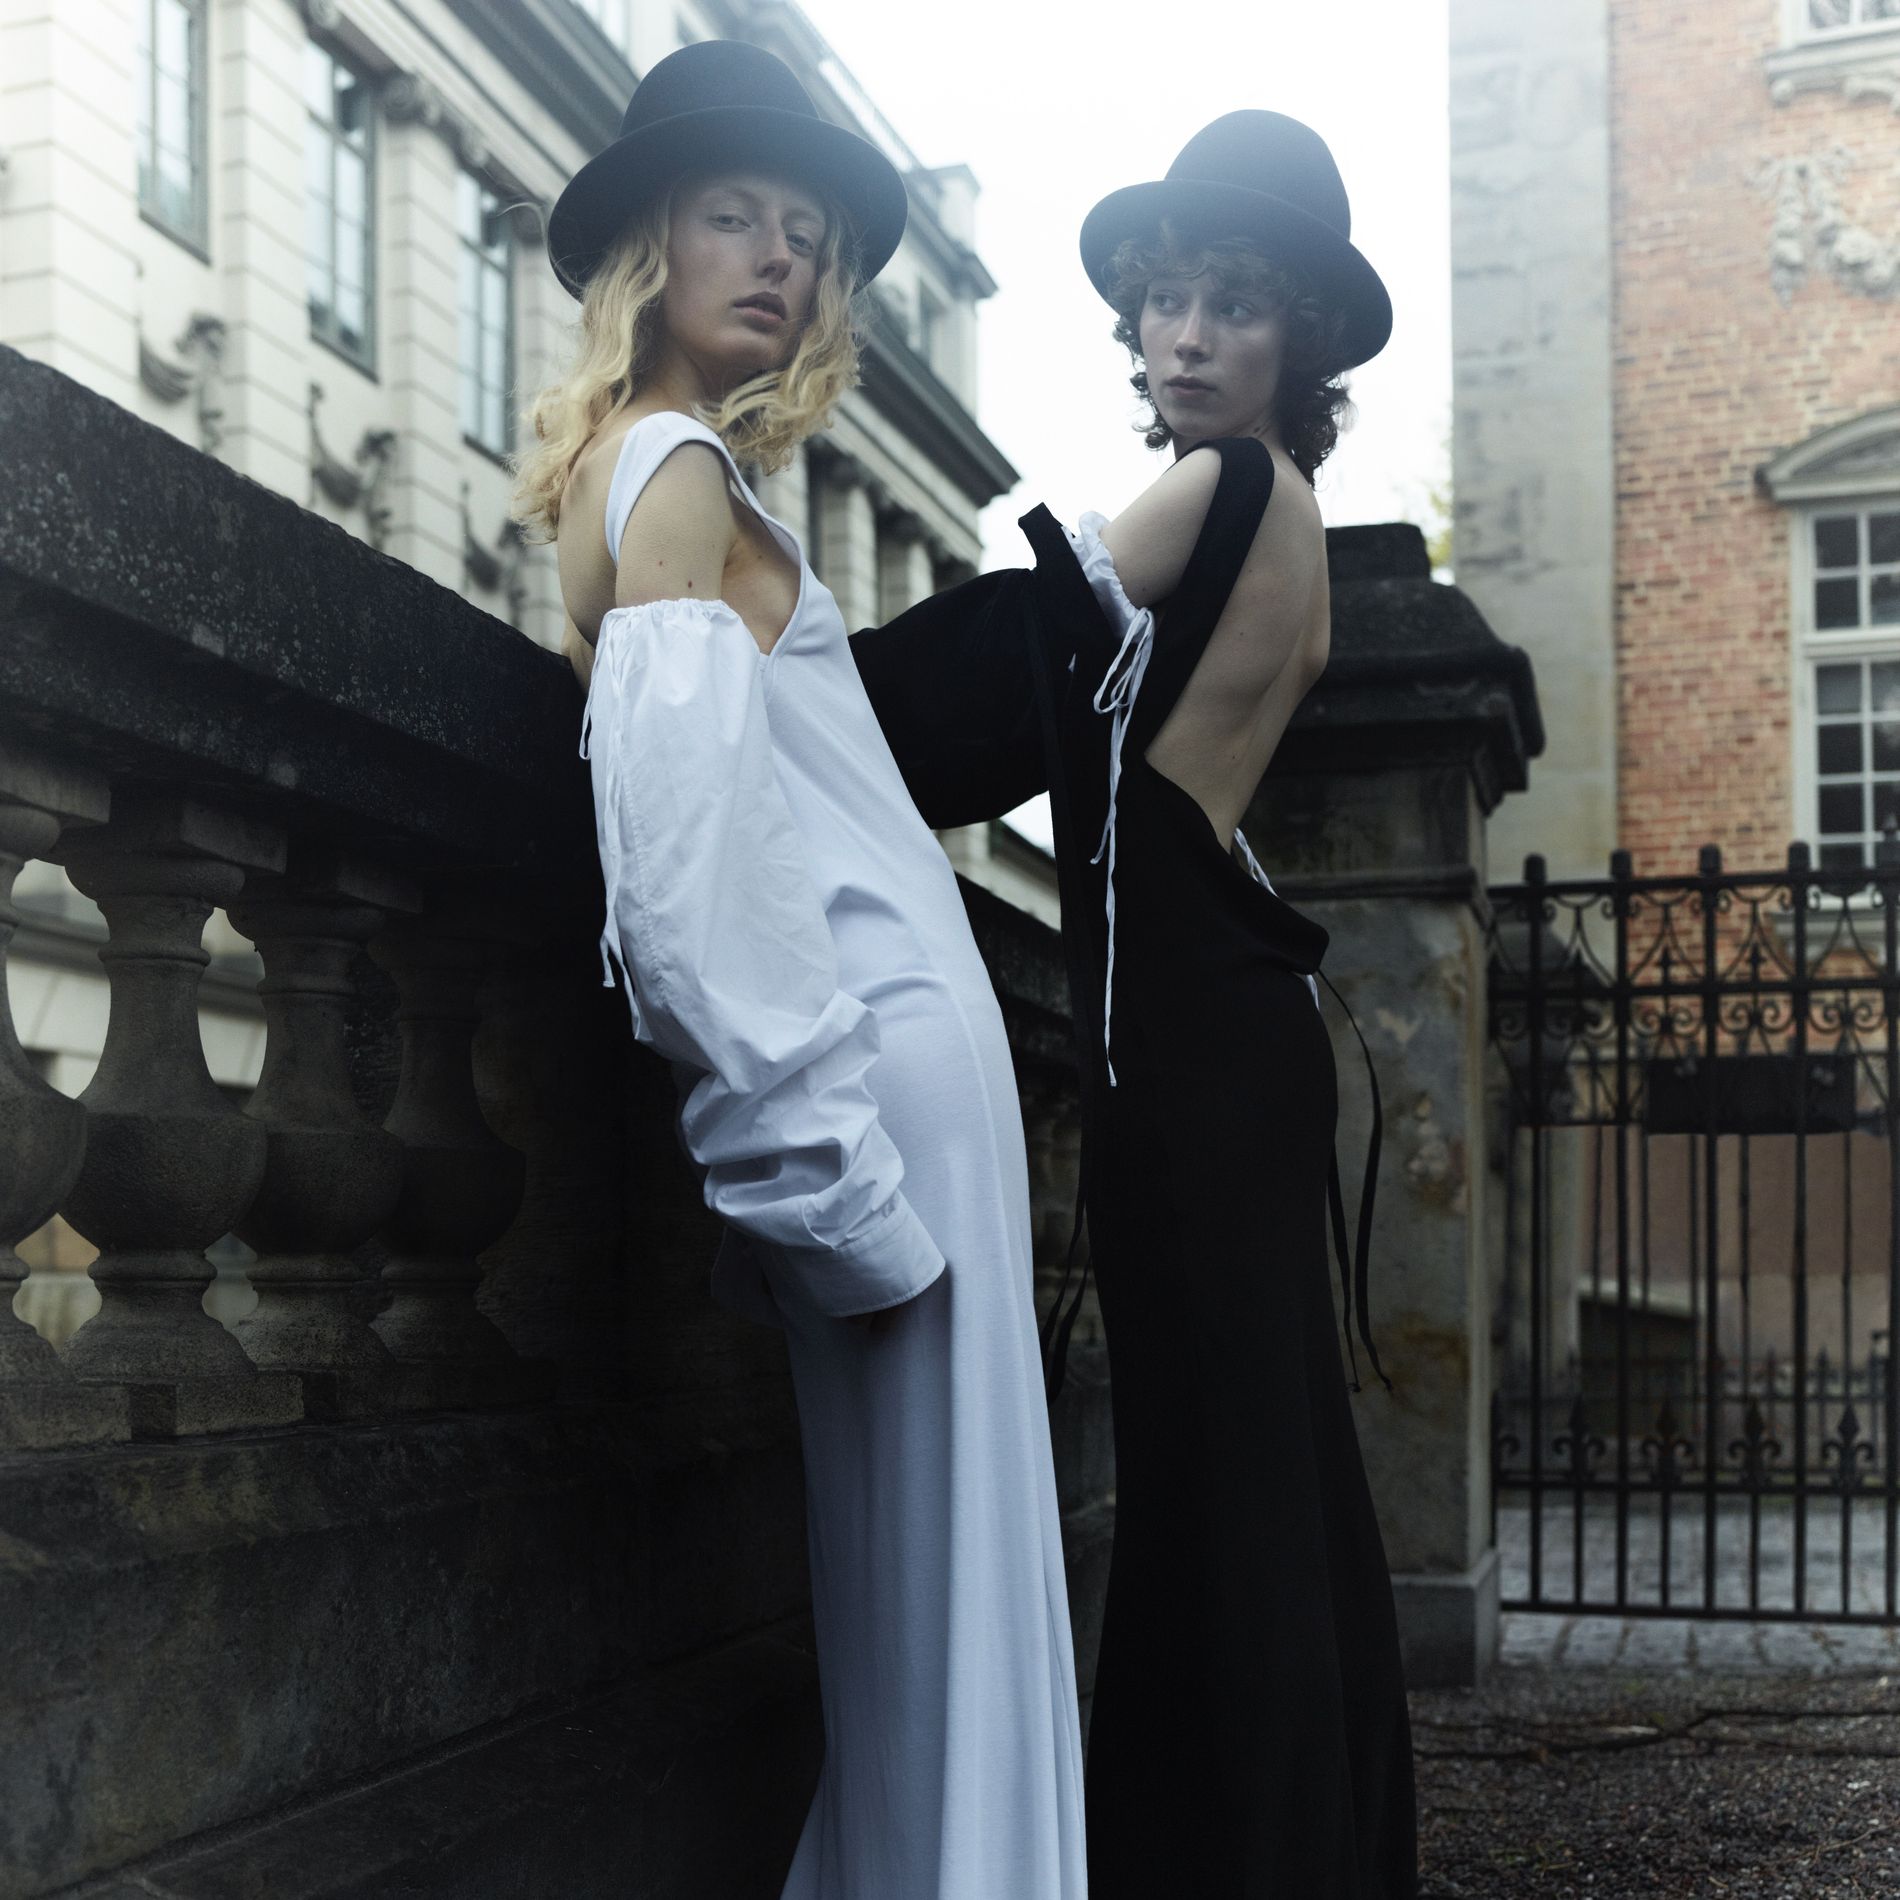 Left: Dress, €812, Detachable sleeves, €334, Hat, €440, Shoes, €690. All Ann Demeulemeester. Right: Silk dress with open back, €822, Detachable sleeves, €334, Hat, €440, Shoes, €690. All Ann Demeulemeester.